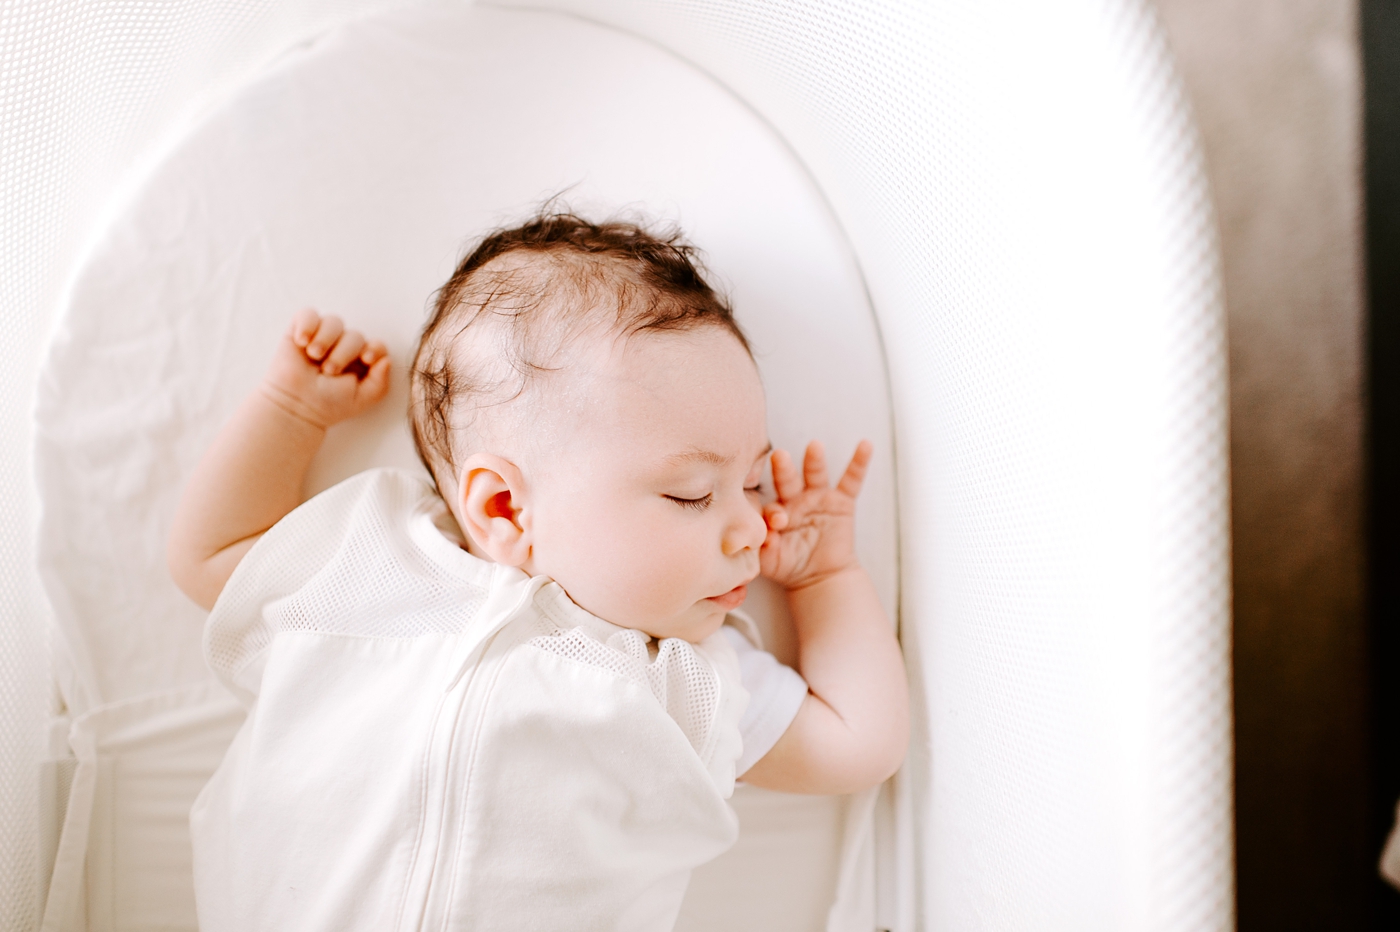 Baby boy fast asleep in snoo during lifestyle newborn session. Photo by Meg Newton Photography.